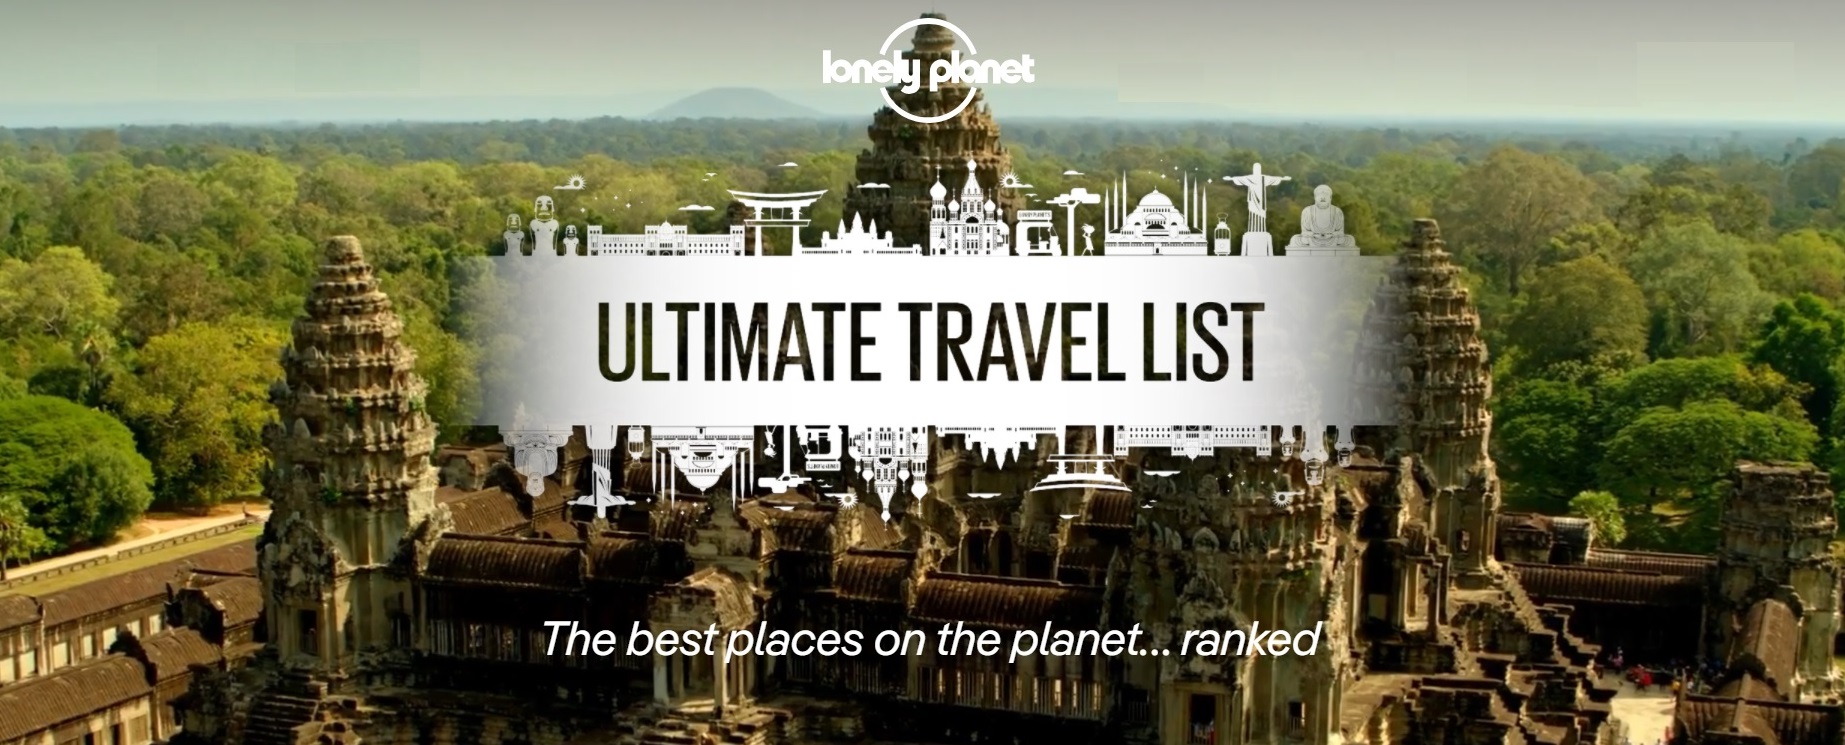 Lonely Planet’s Ultimate Travel List is here